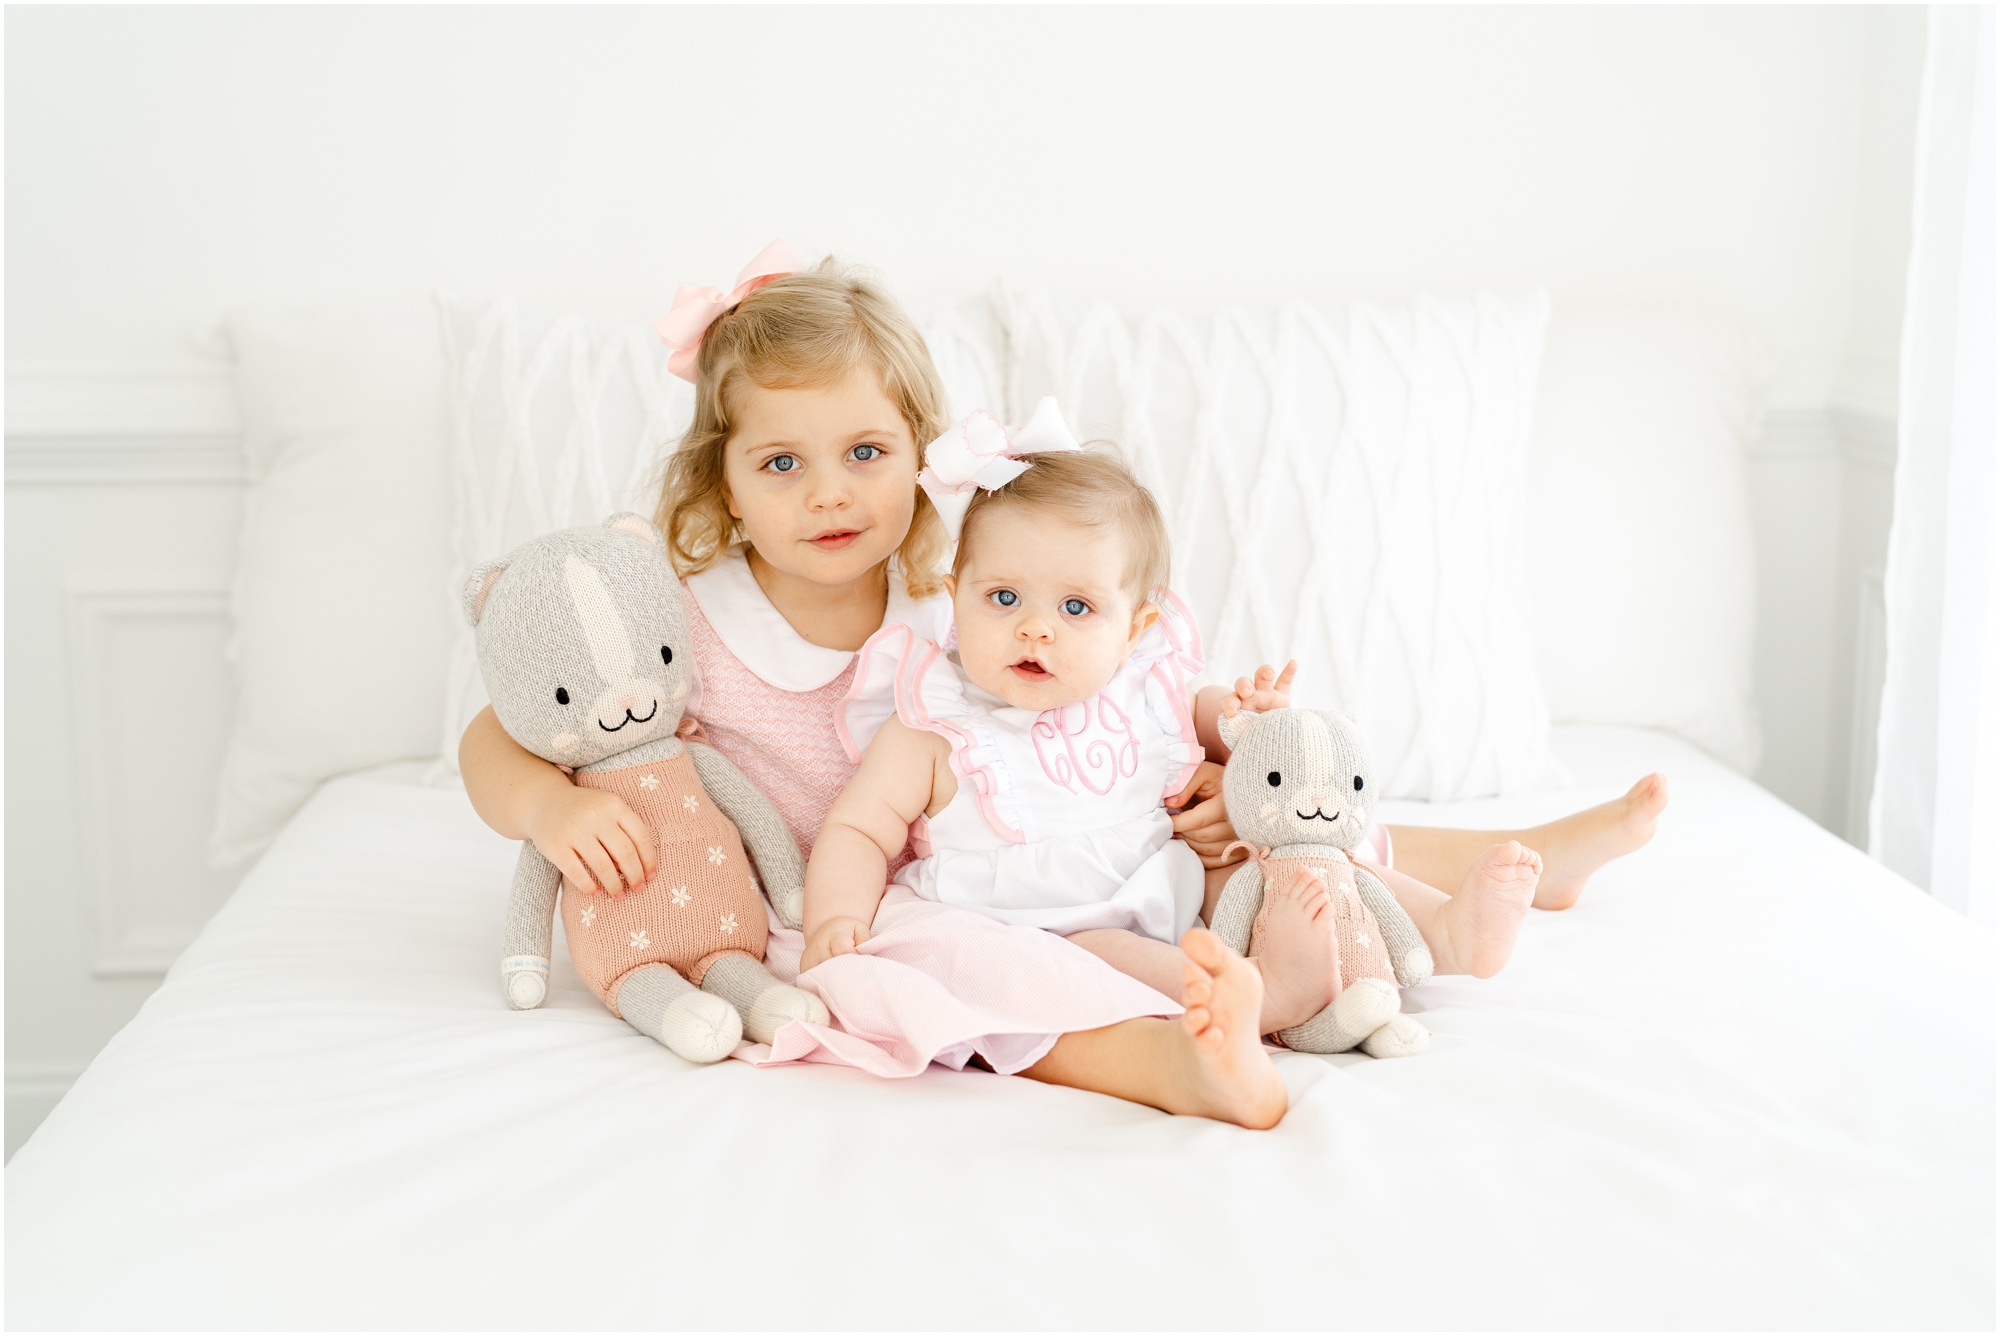 Portraits of a 6 month old baby with her toddler sister in an all white studio during an Atlanta sitter session.